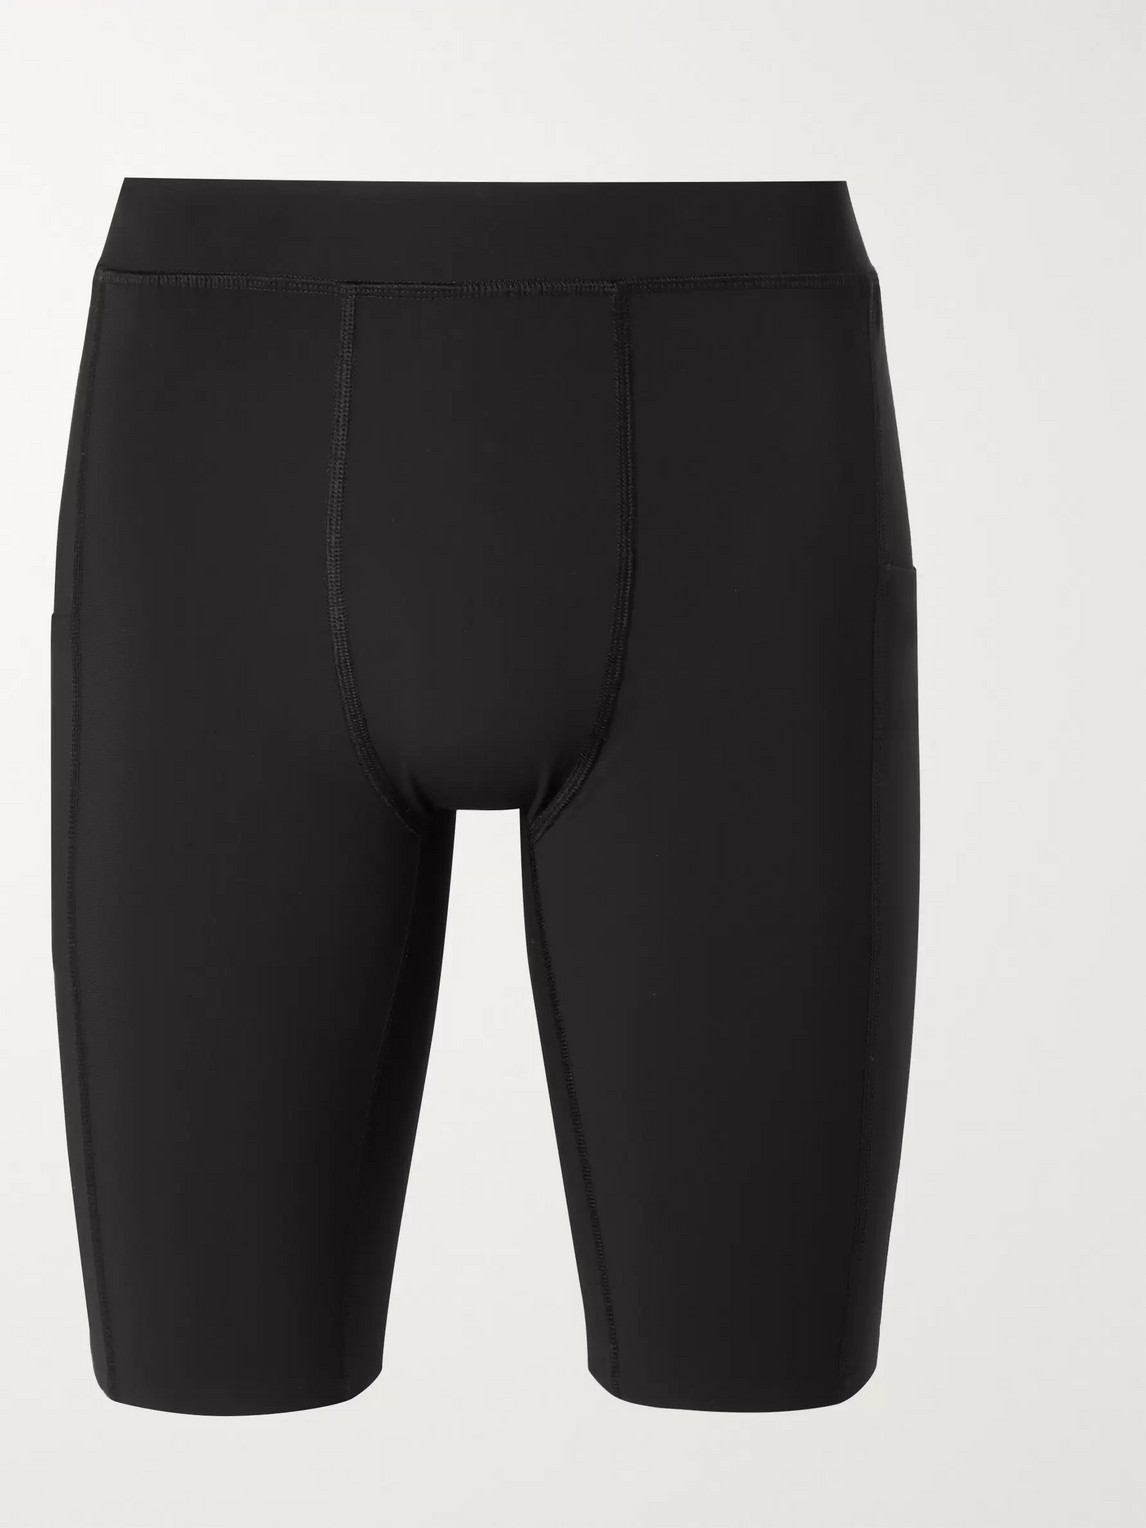 Iffley Road Chester Compression Shorts In Black